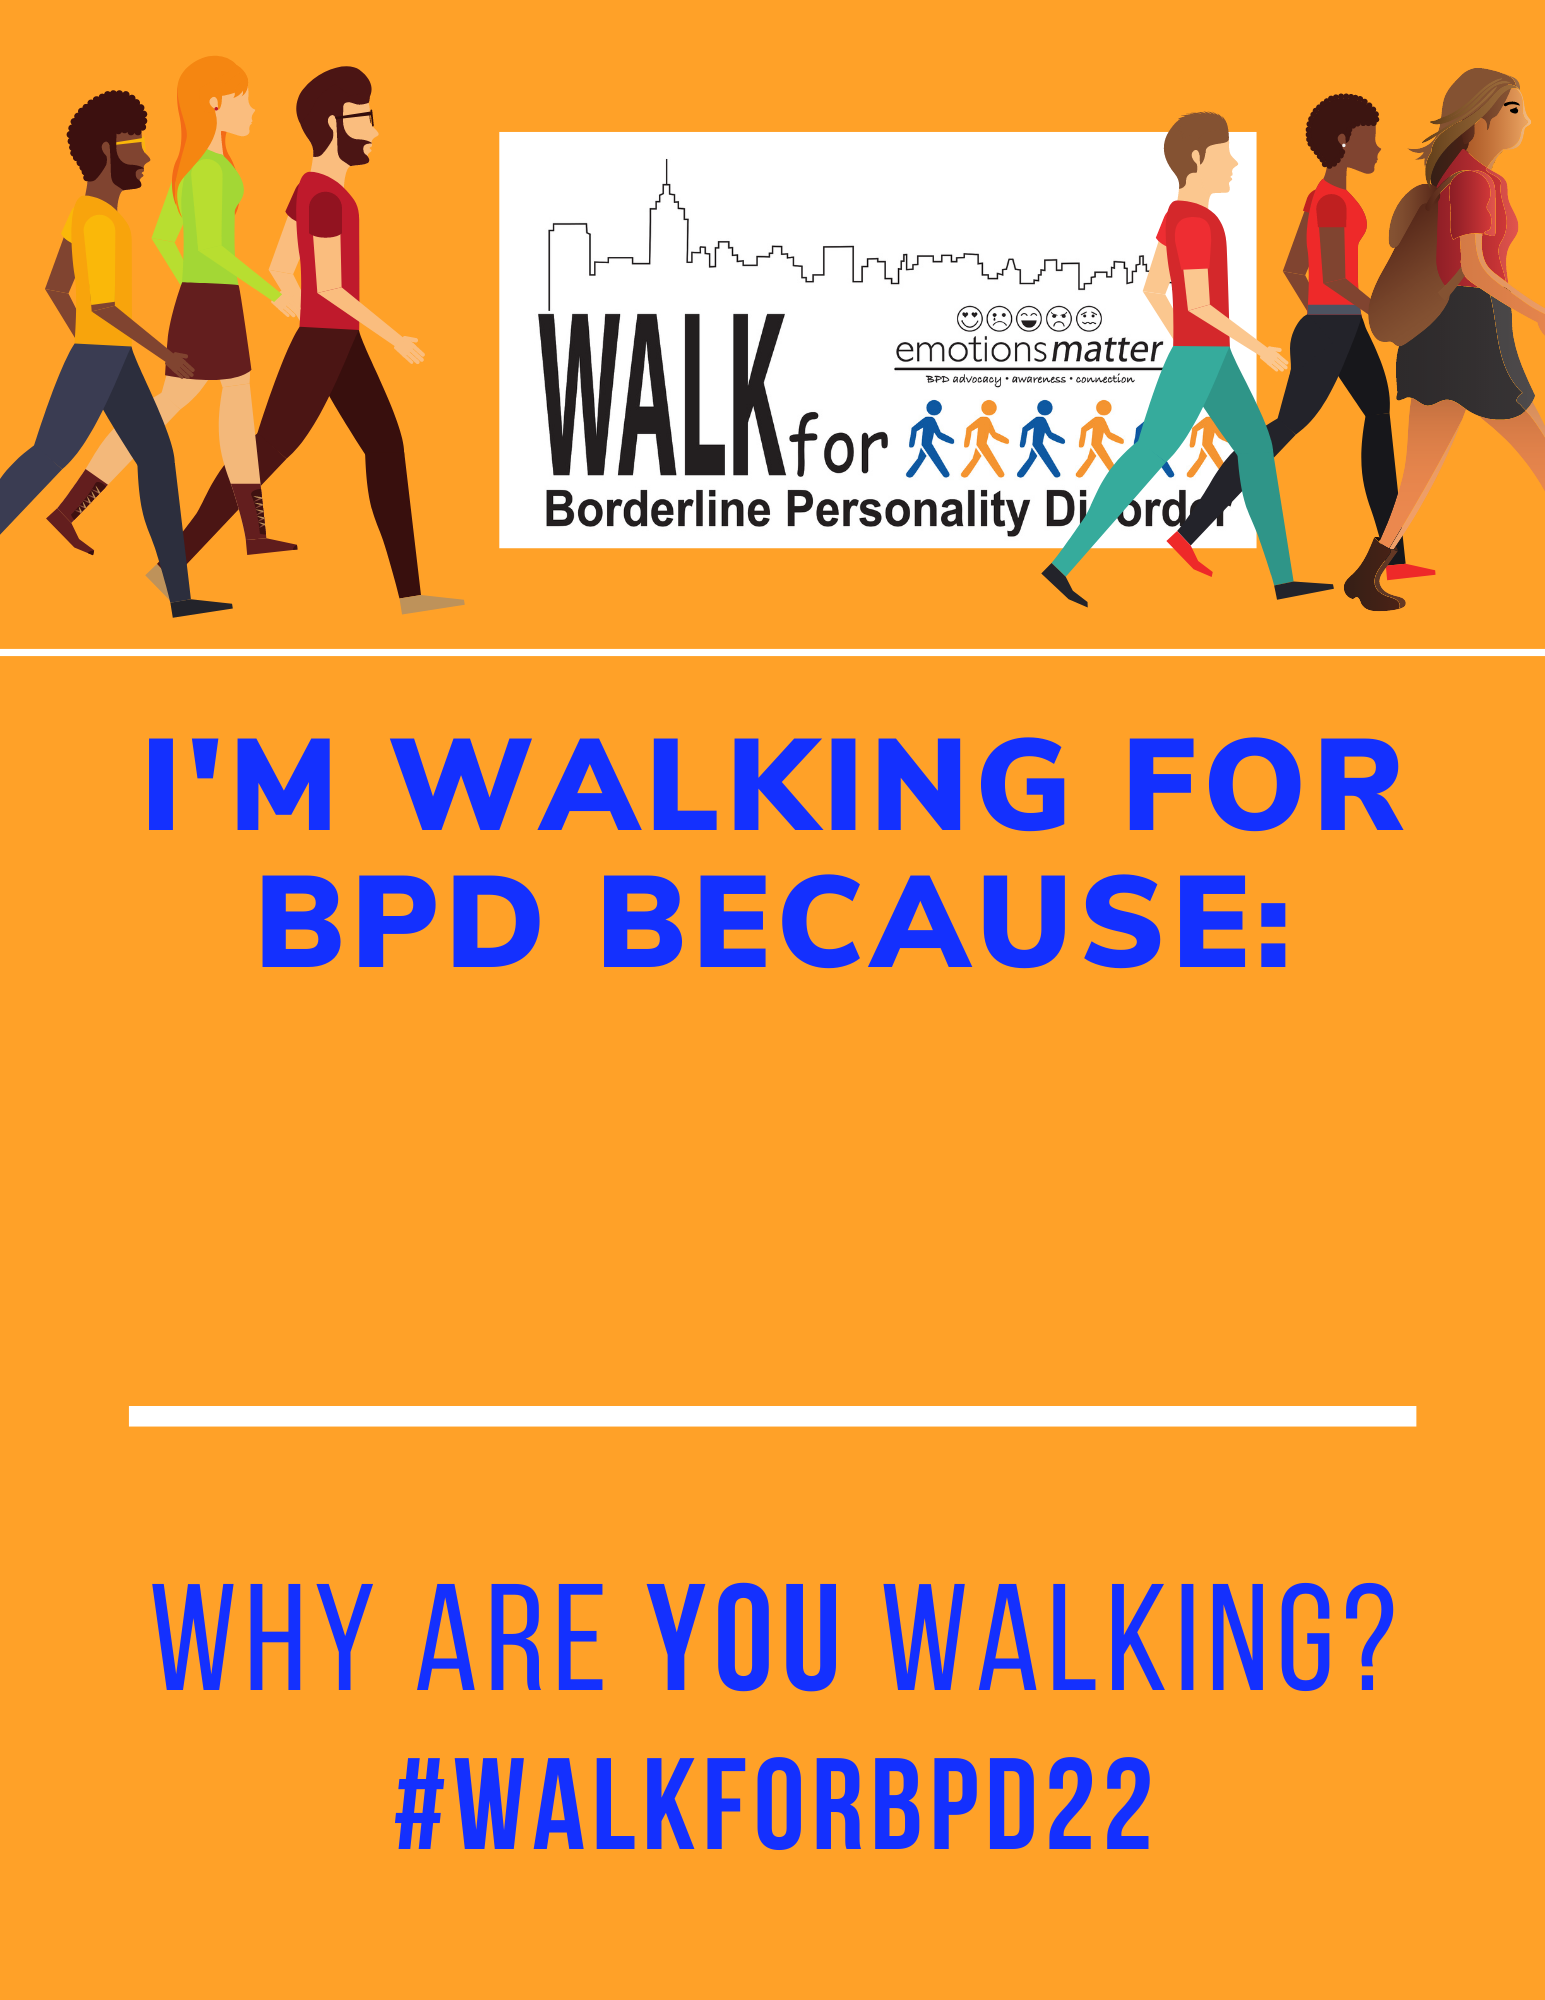 Tell us Why you are Walking!